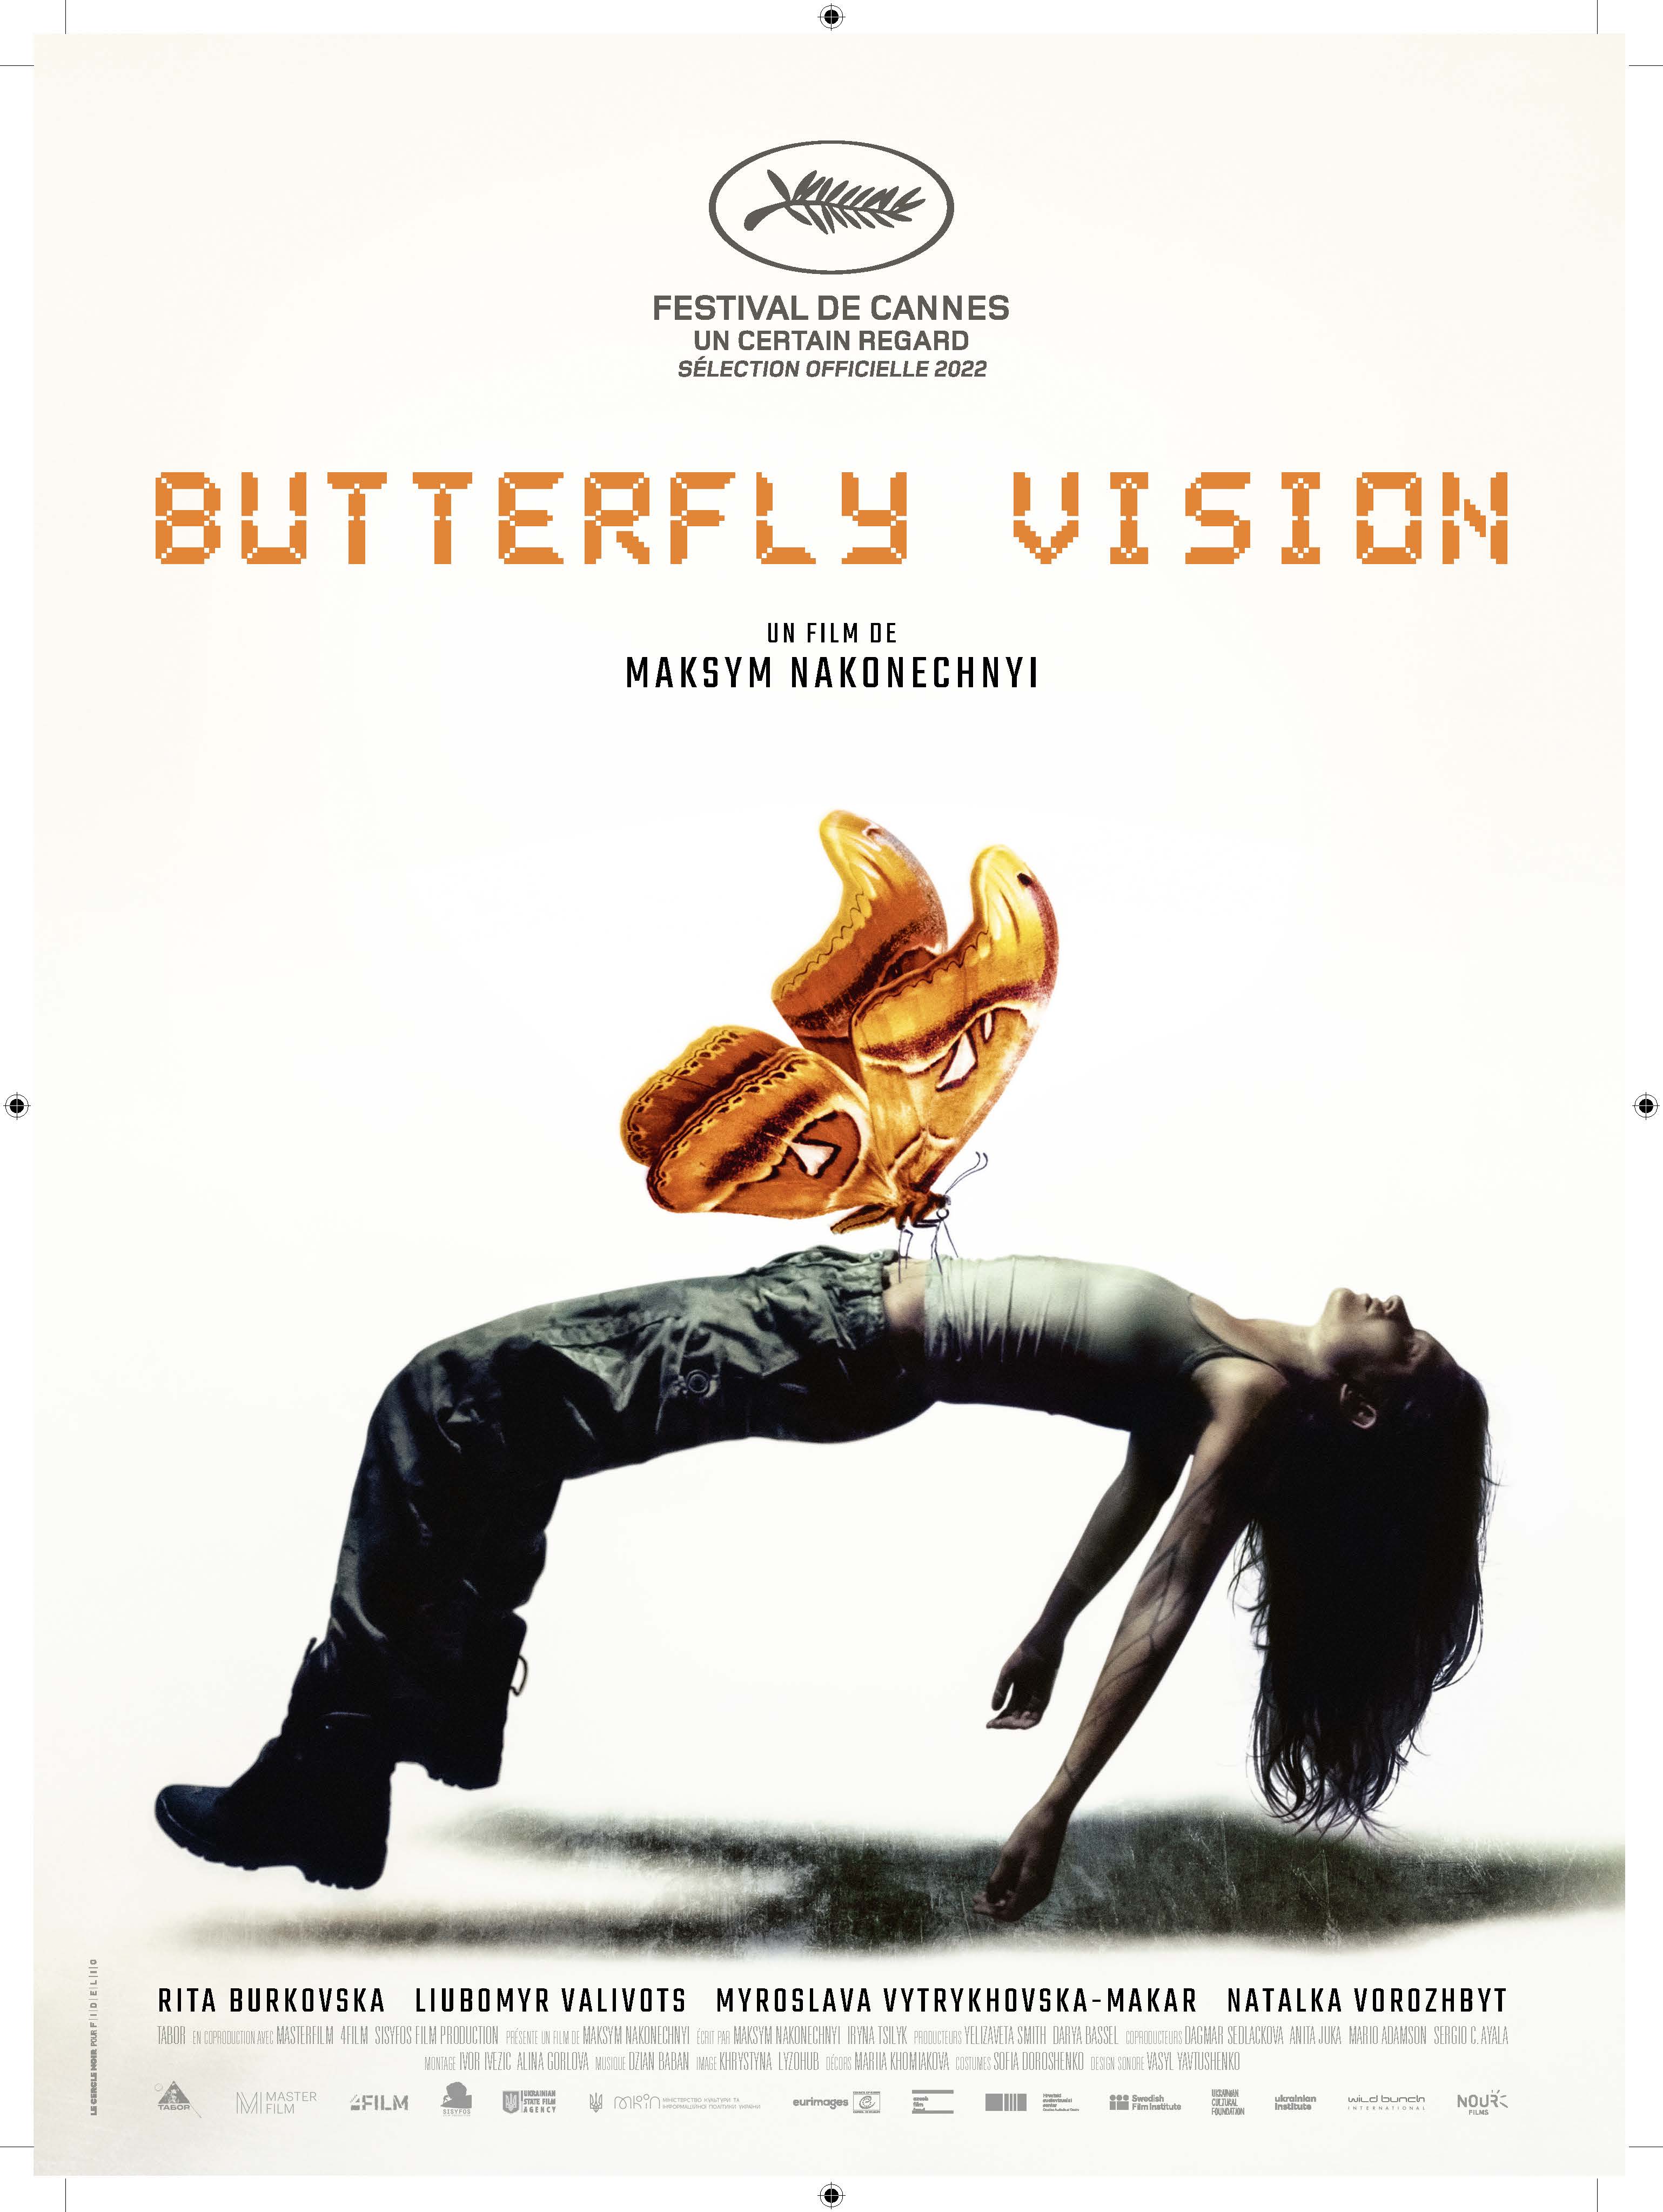 Butterfly vision